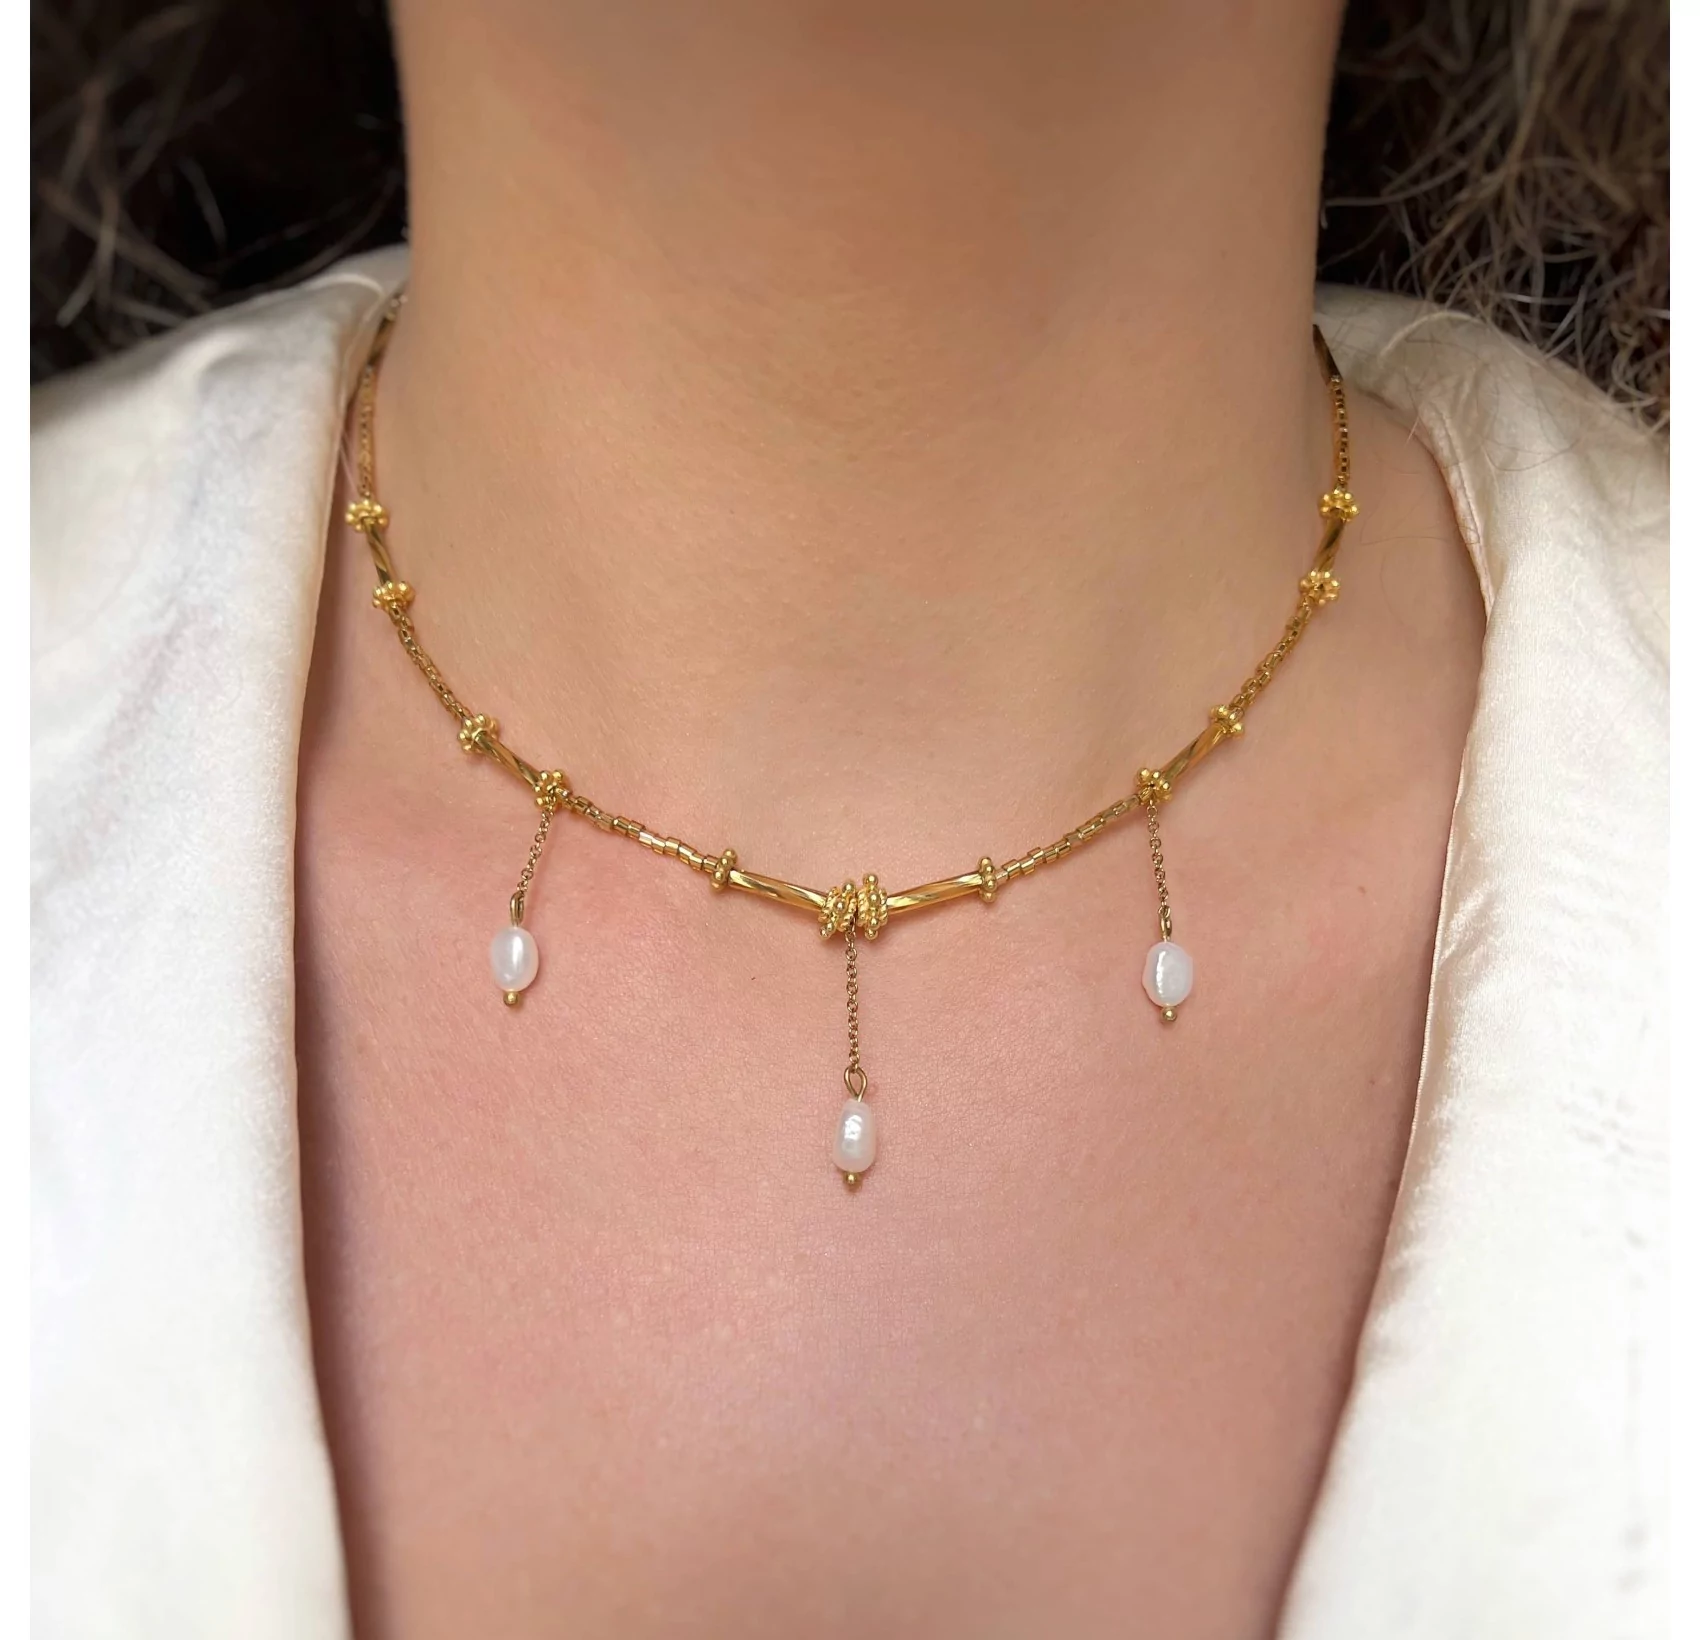 Xar necklace in 18k gold plated silver and glass - Belén Bajo